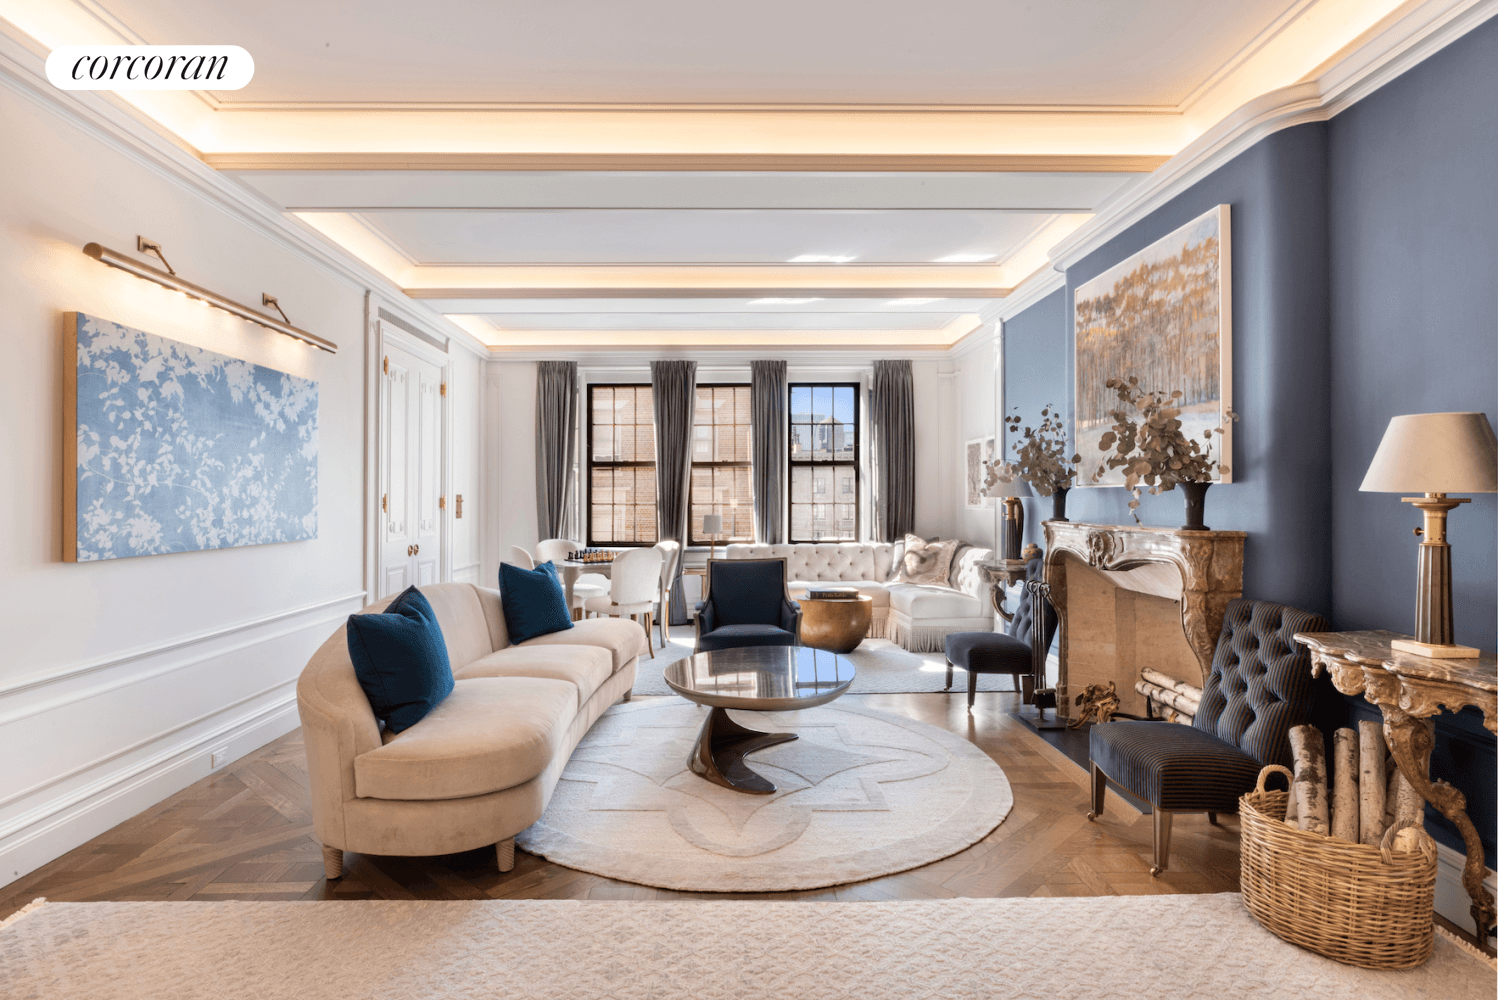 Stephen Sills decorator and Charlotte Worthy architect have created a truly one of a kind masterpiece at 888 Park Avenue.